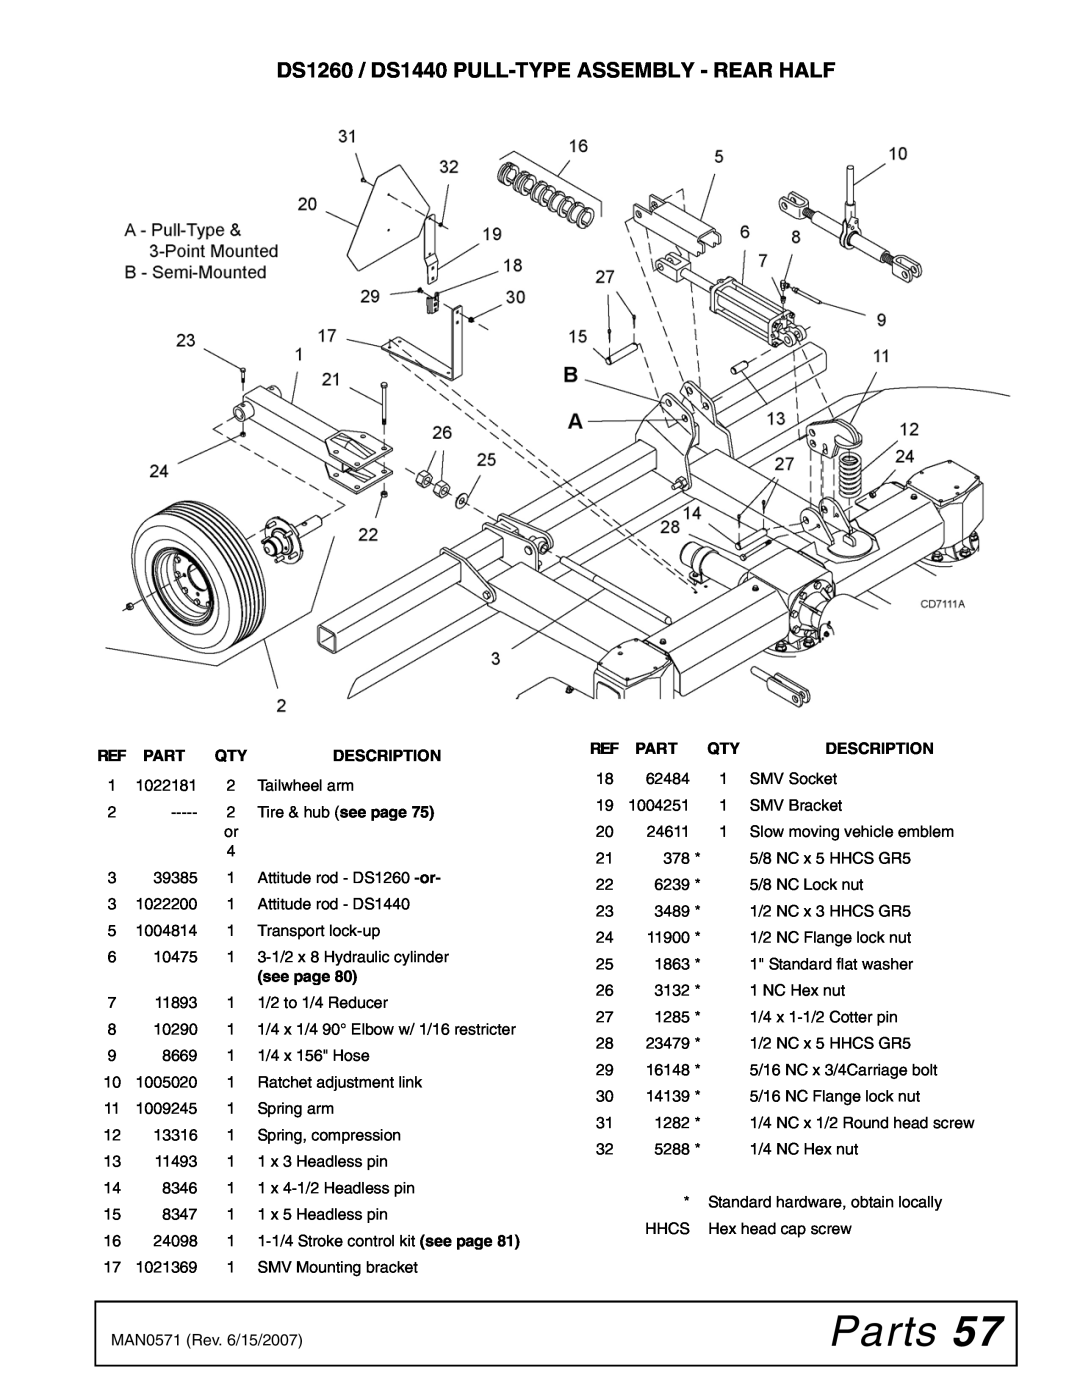 Woods Equipment DS1440Q, DSO1260Q, DS1260Q Parts, DS1260 / DS1440 PULL-TYPE ASSEMBLY - REAR HALF, Description, see page 